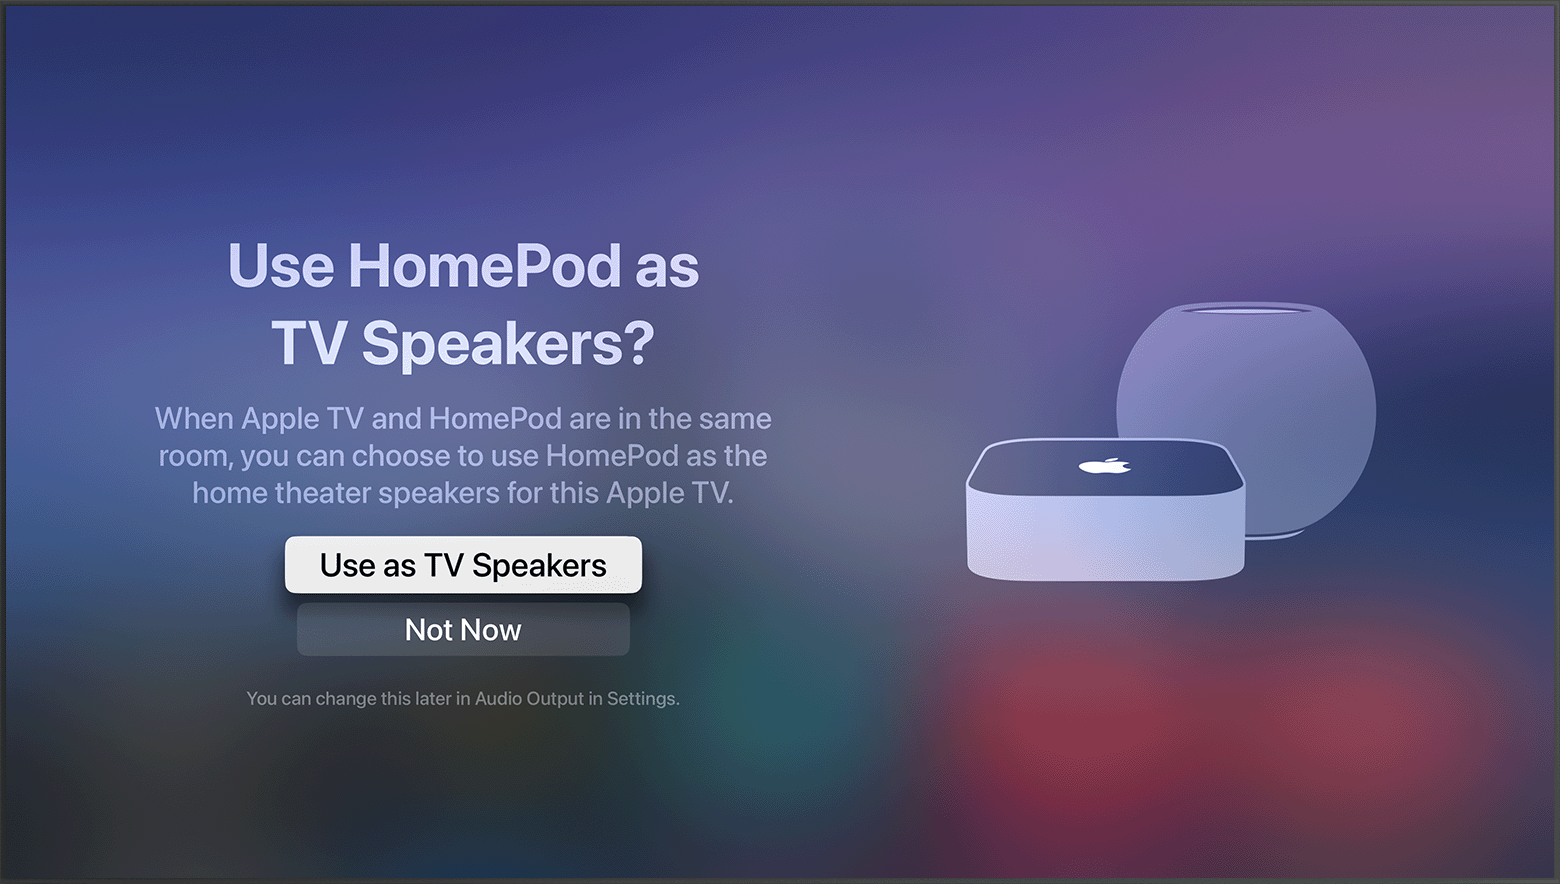 tvOS screenshot showing the prompt to Use HomePod speakers as Apple TV speakers